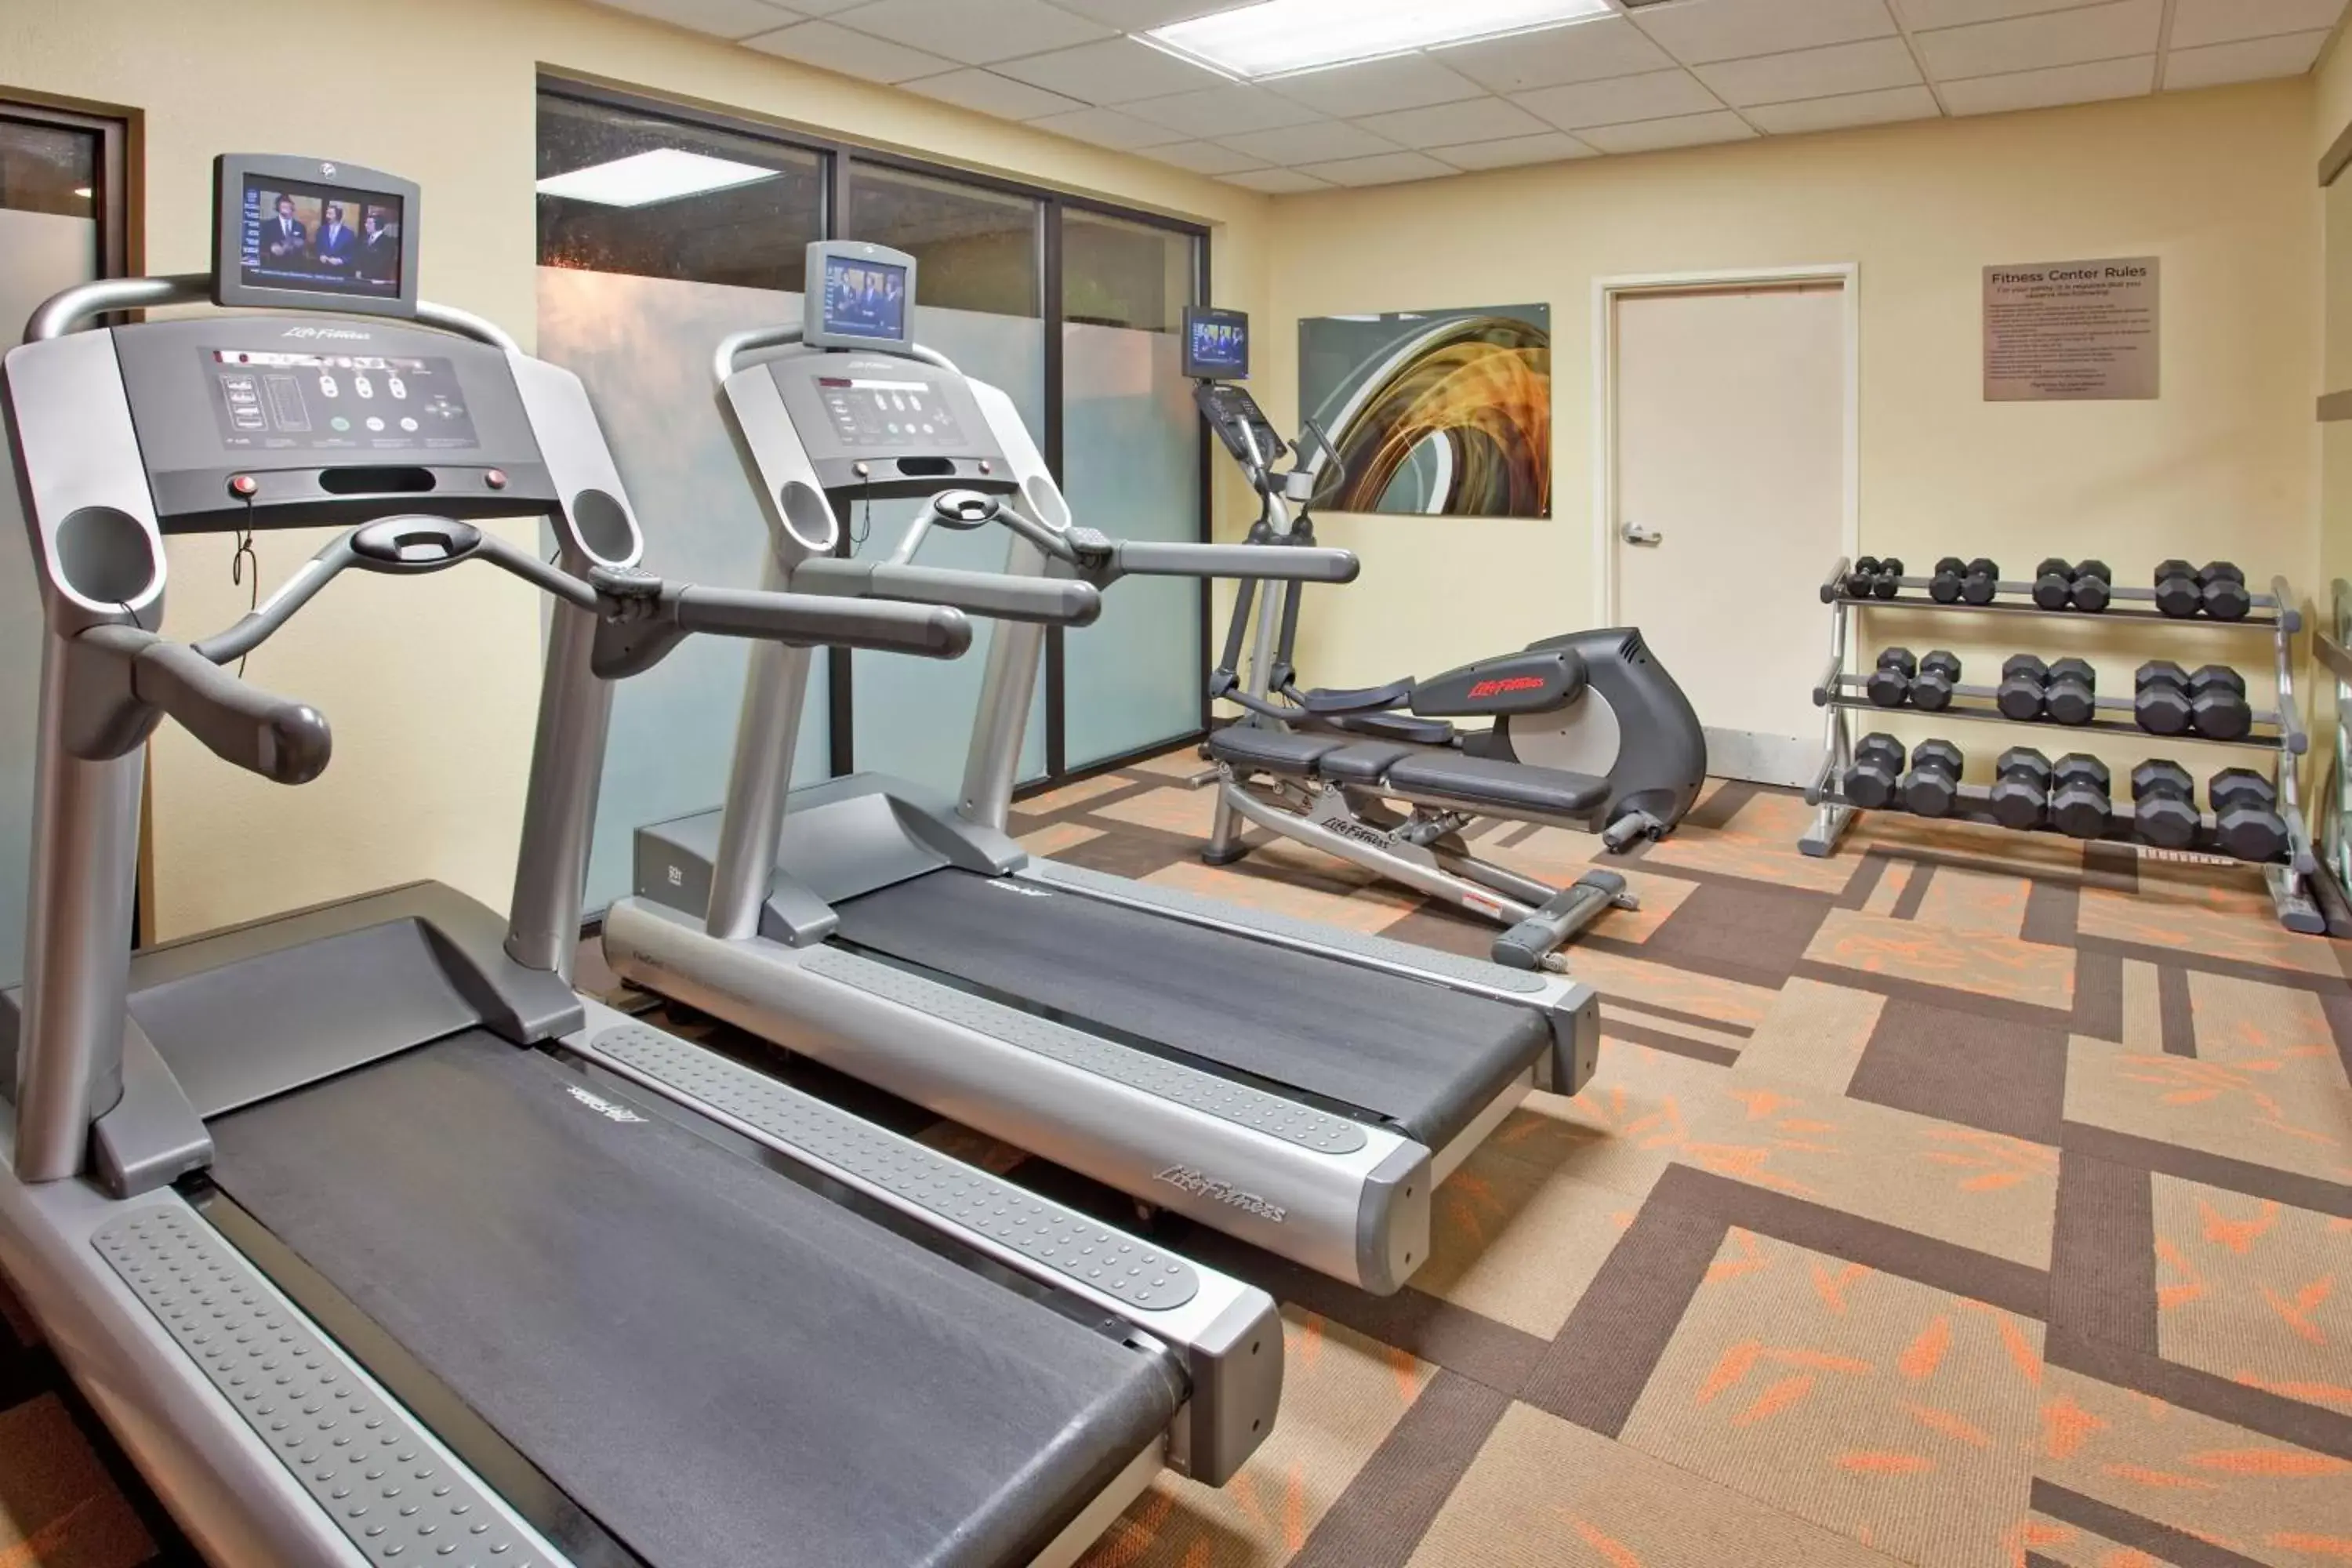 Fitness centre/facilities, Fitness Center/Facilities in Courtyard Houston Sugar Land/Stafford